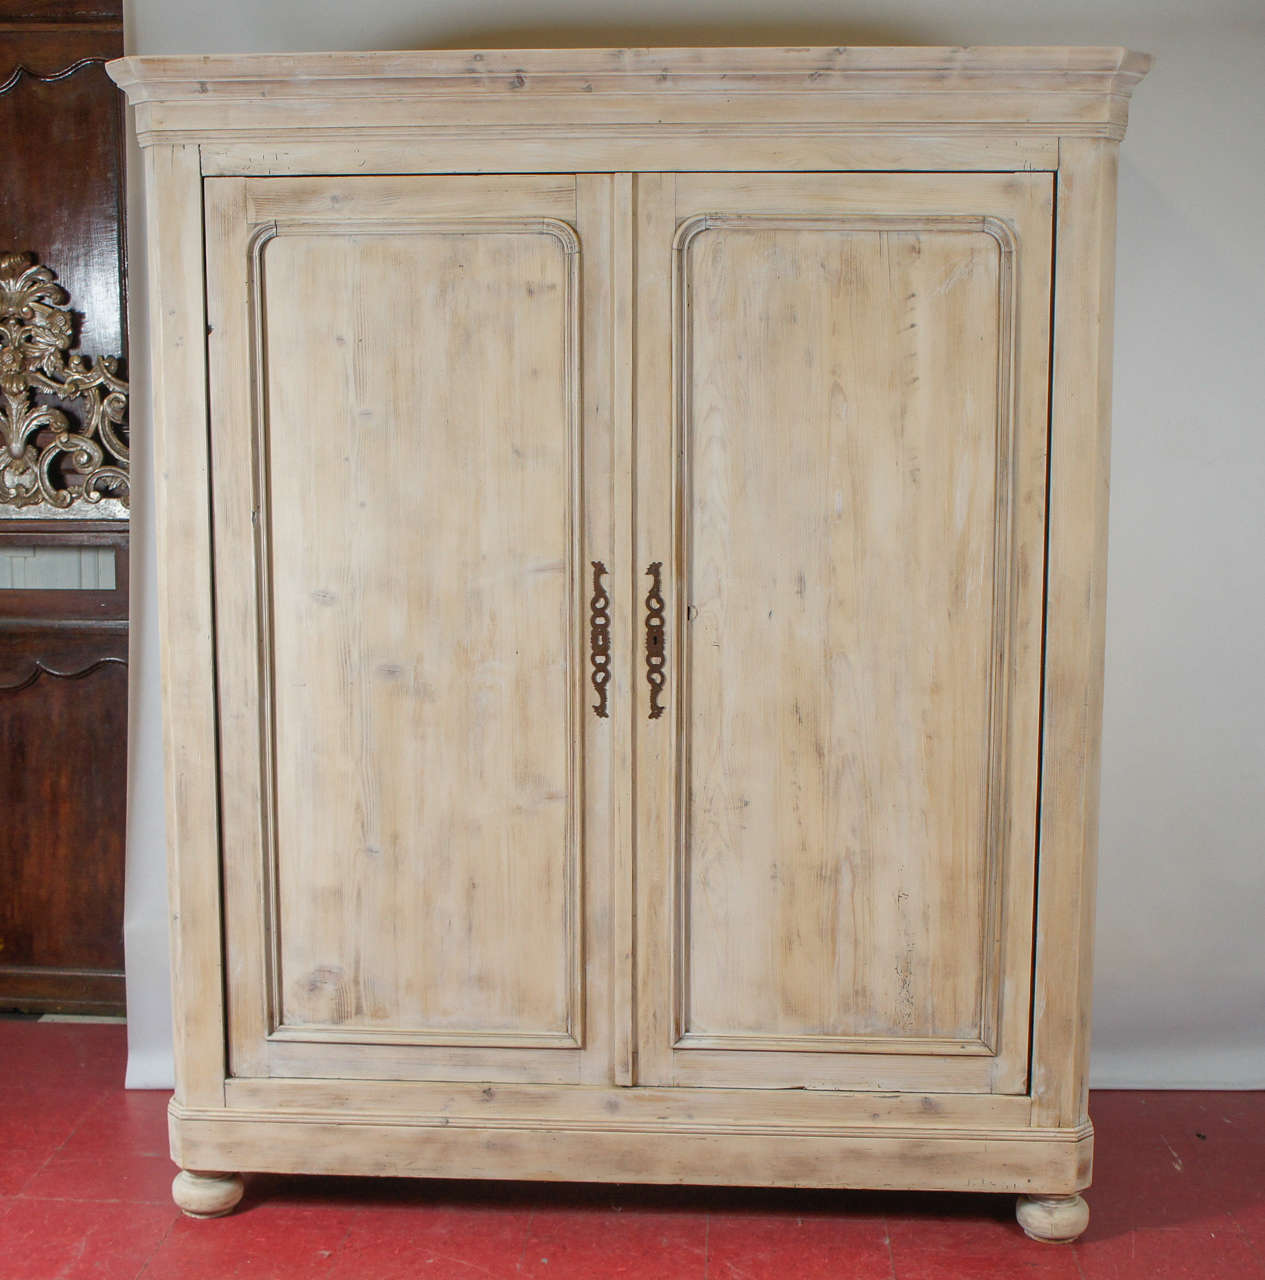 19th century European painted pine wardrobe with pocket doors. Cabinet is white washed. Large interior space for ample storage.  Crown molding depth = 24